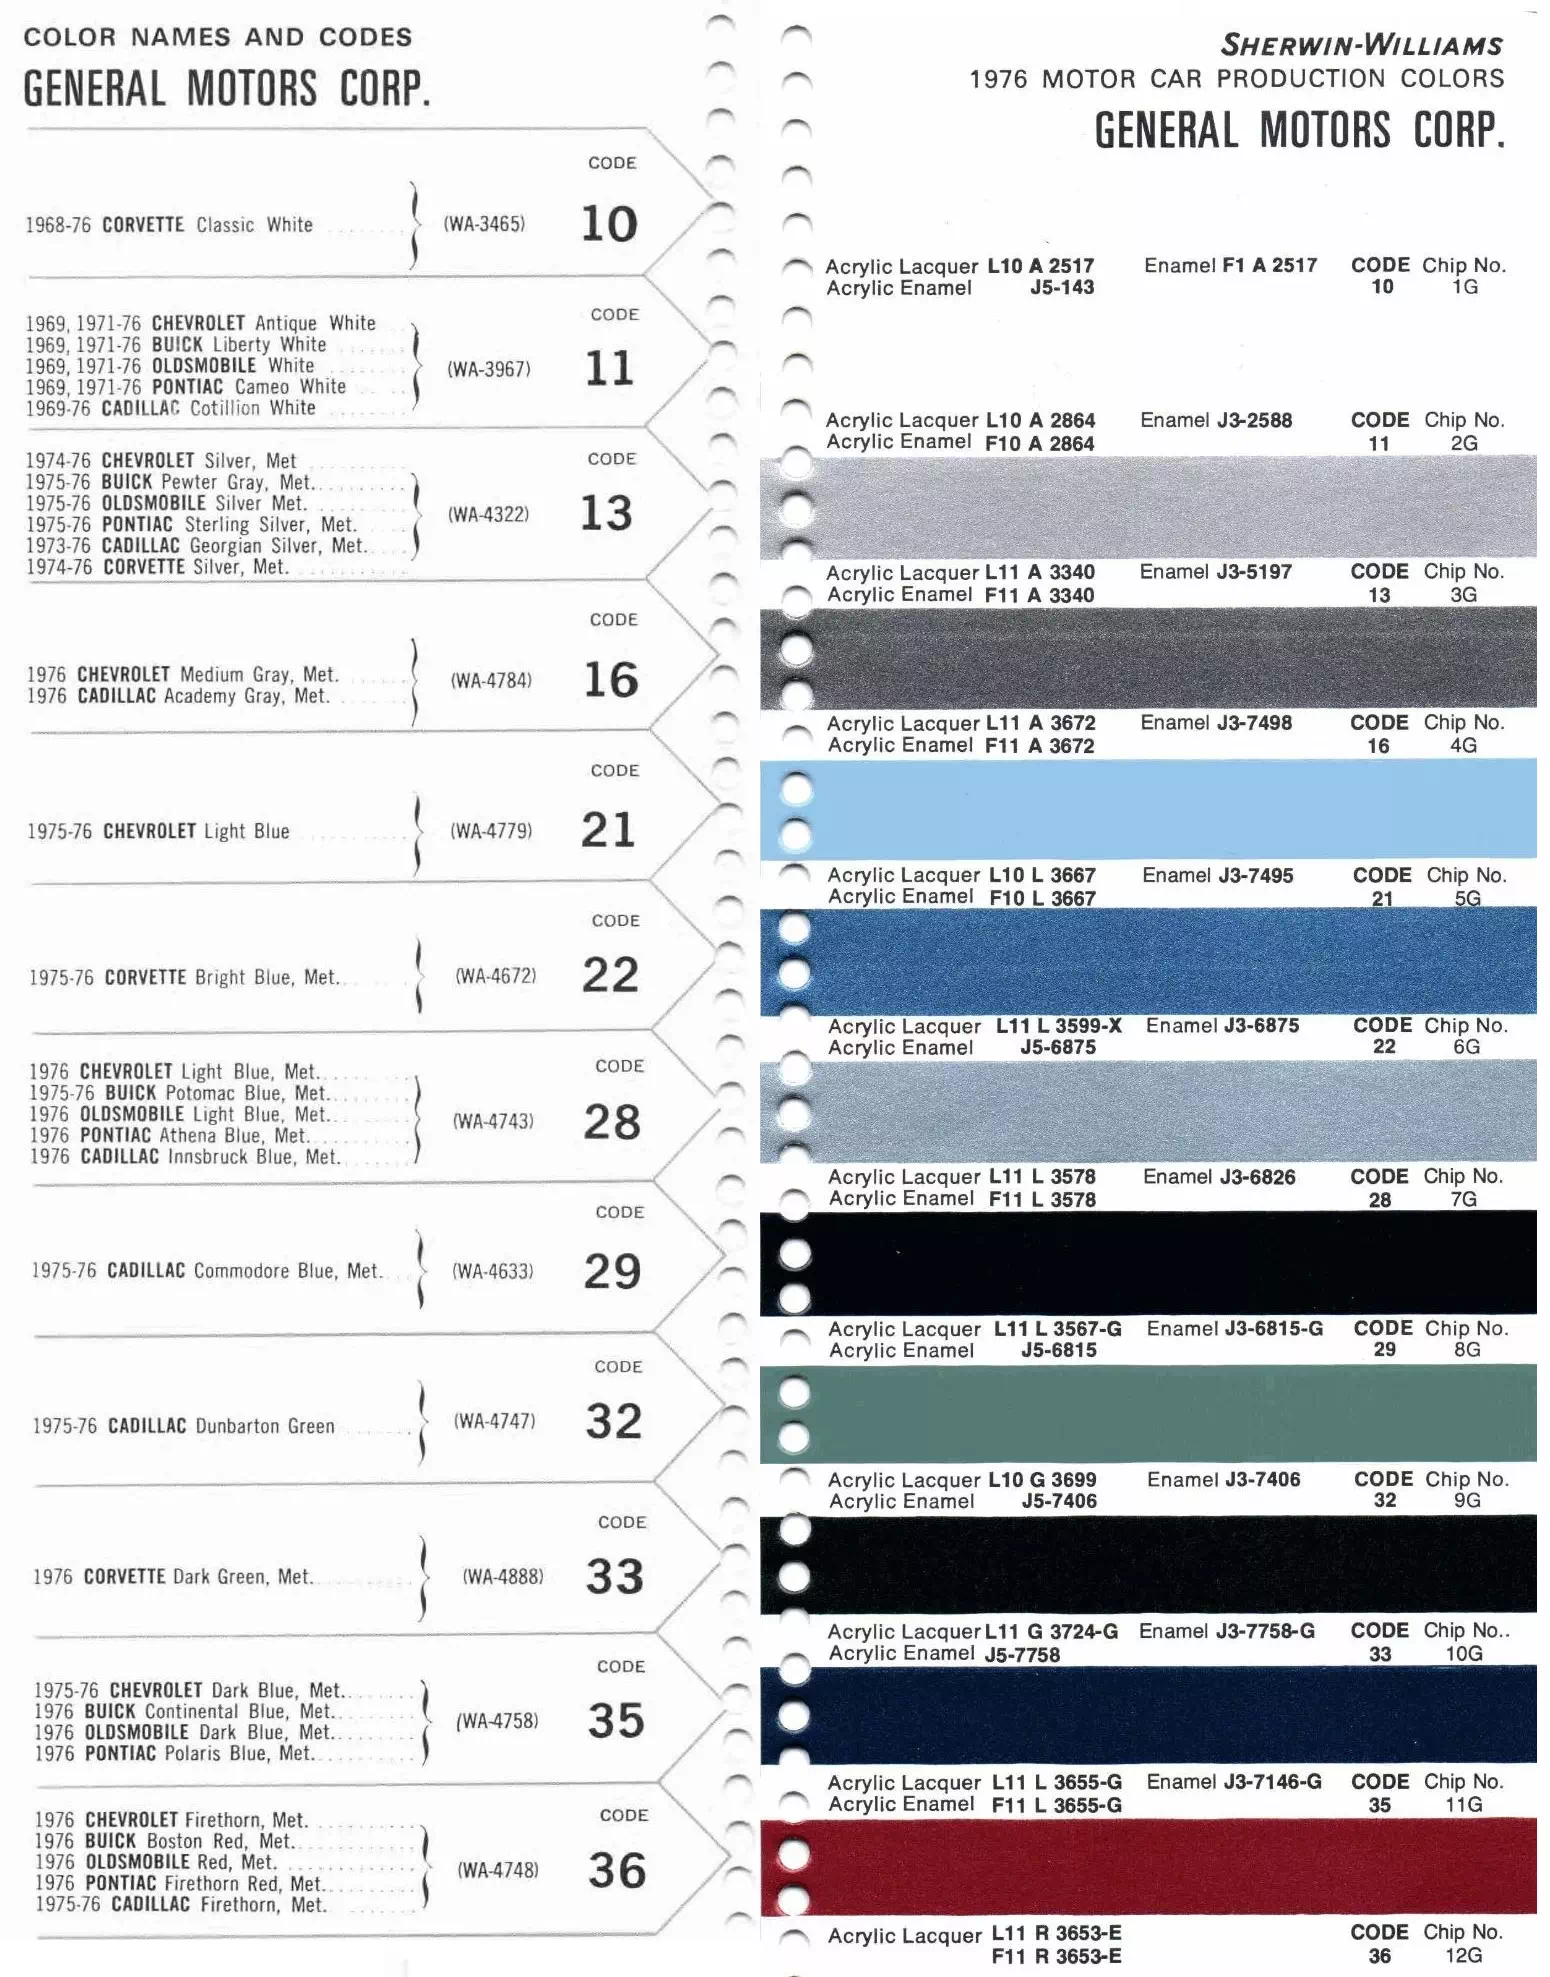 Colors, Descriptions, Codes, and Paint Swatches for General Motors Vehicles in 1976